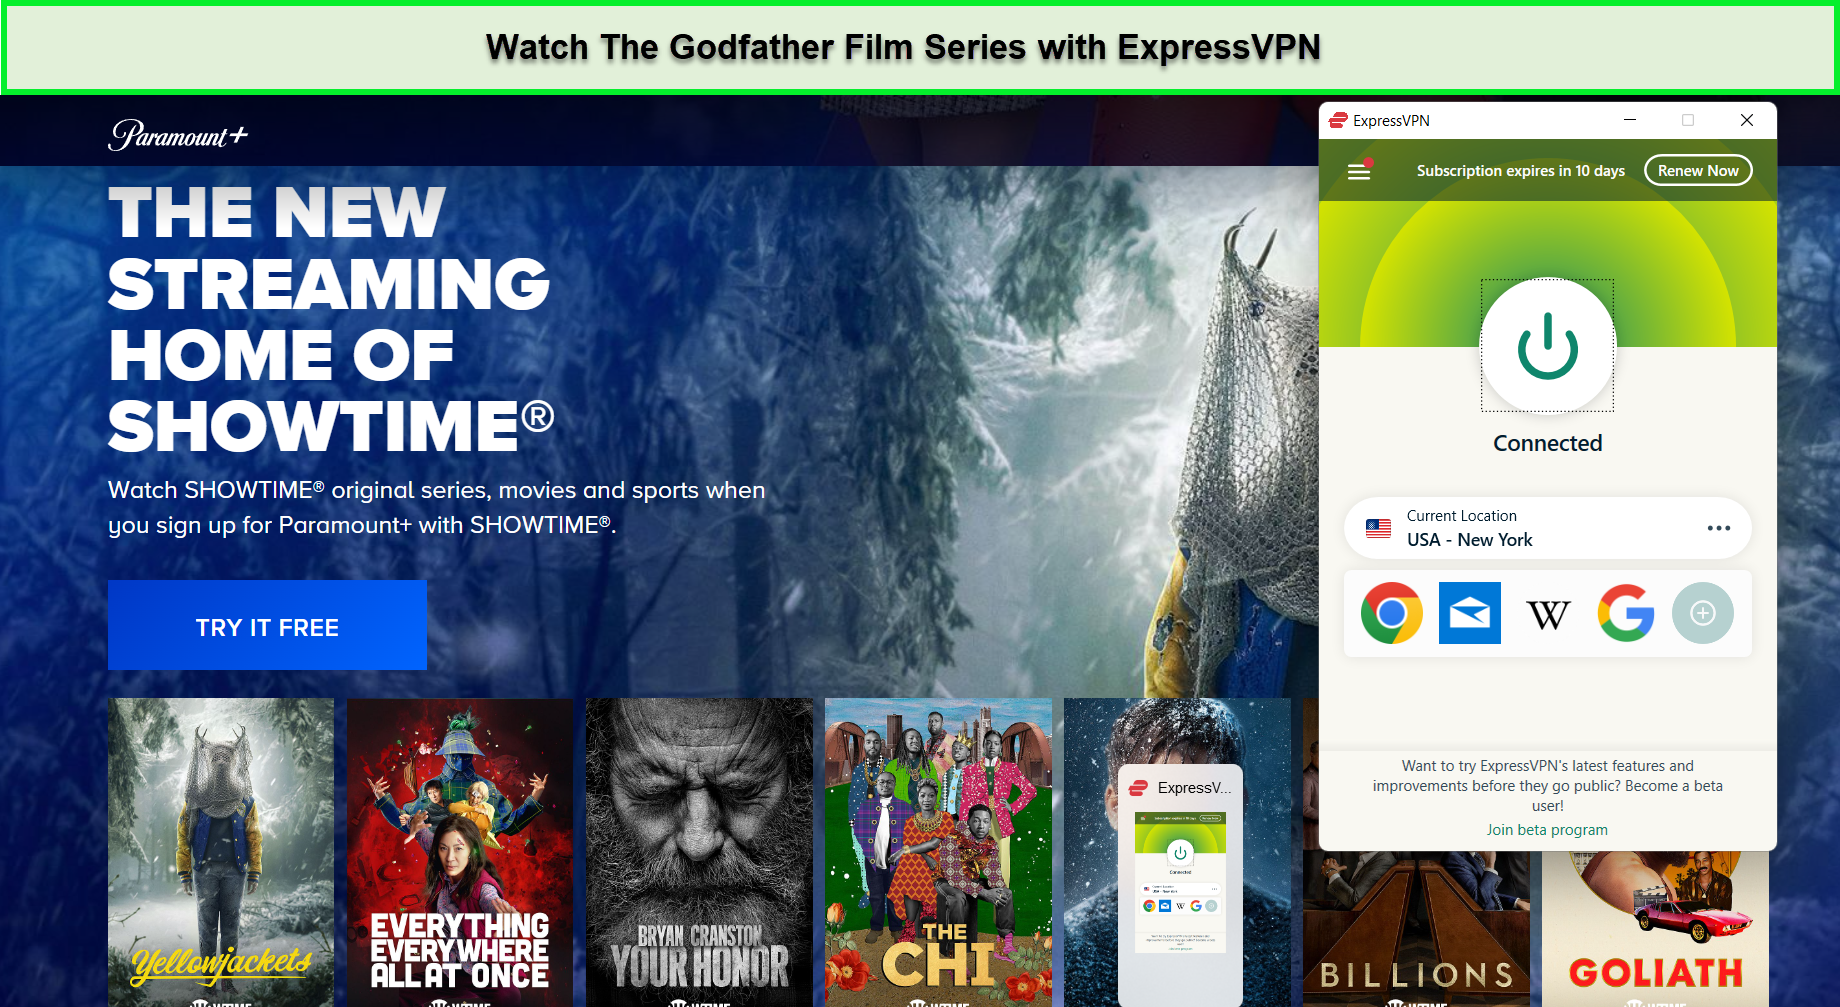 Watch-Godfather-film-series-in-Hong Kong-on-Paramount-Plus-with- ExpressVPN